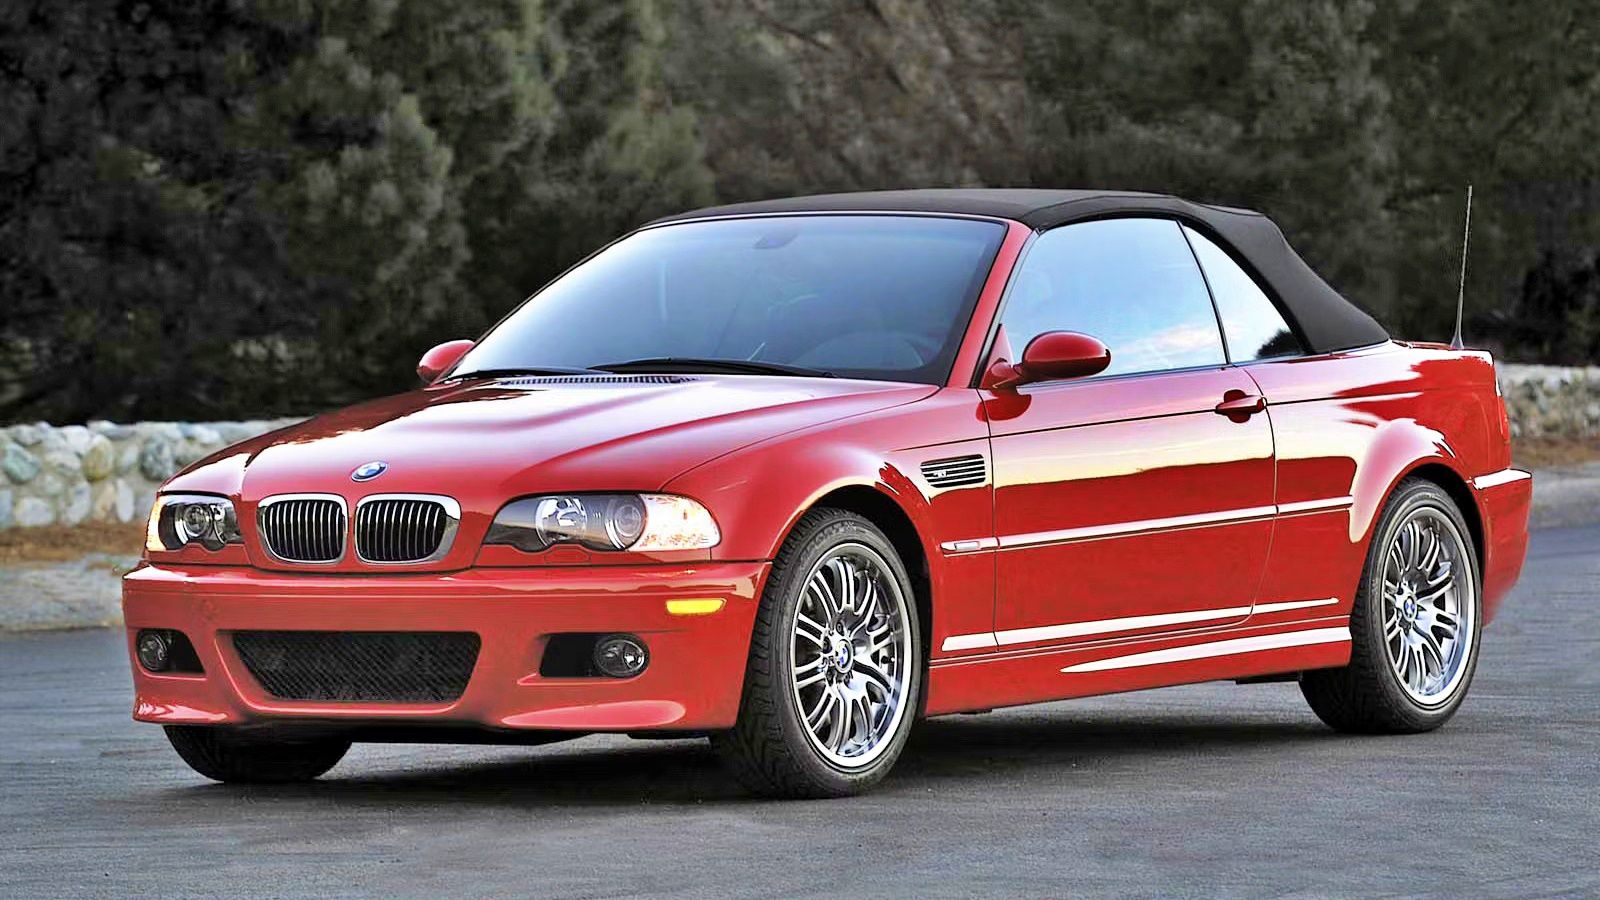 BMW E46: Every Model Year, Ranked